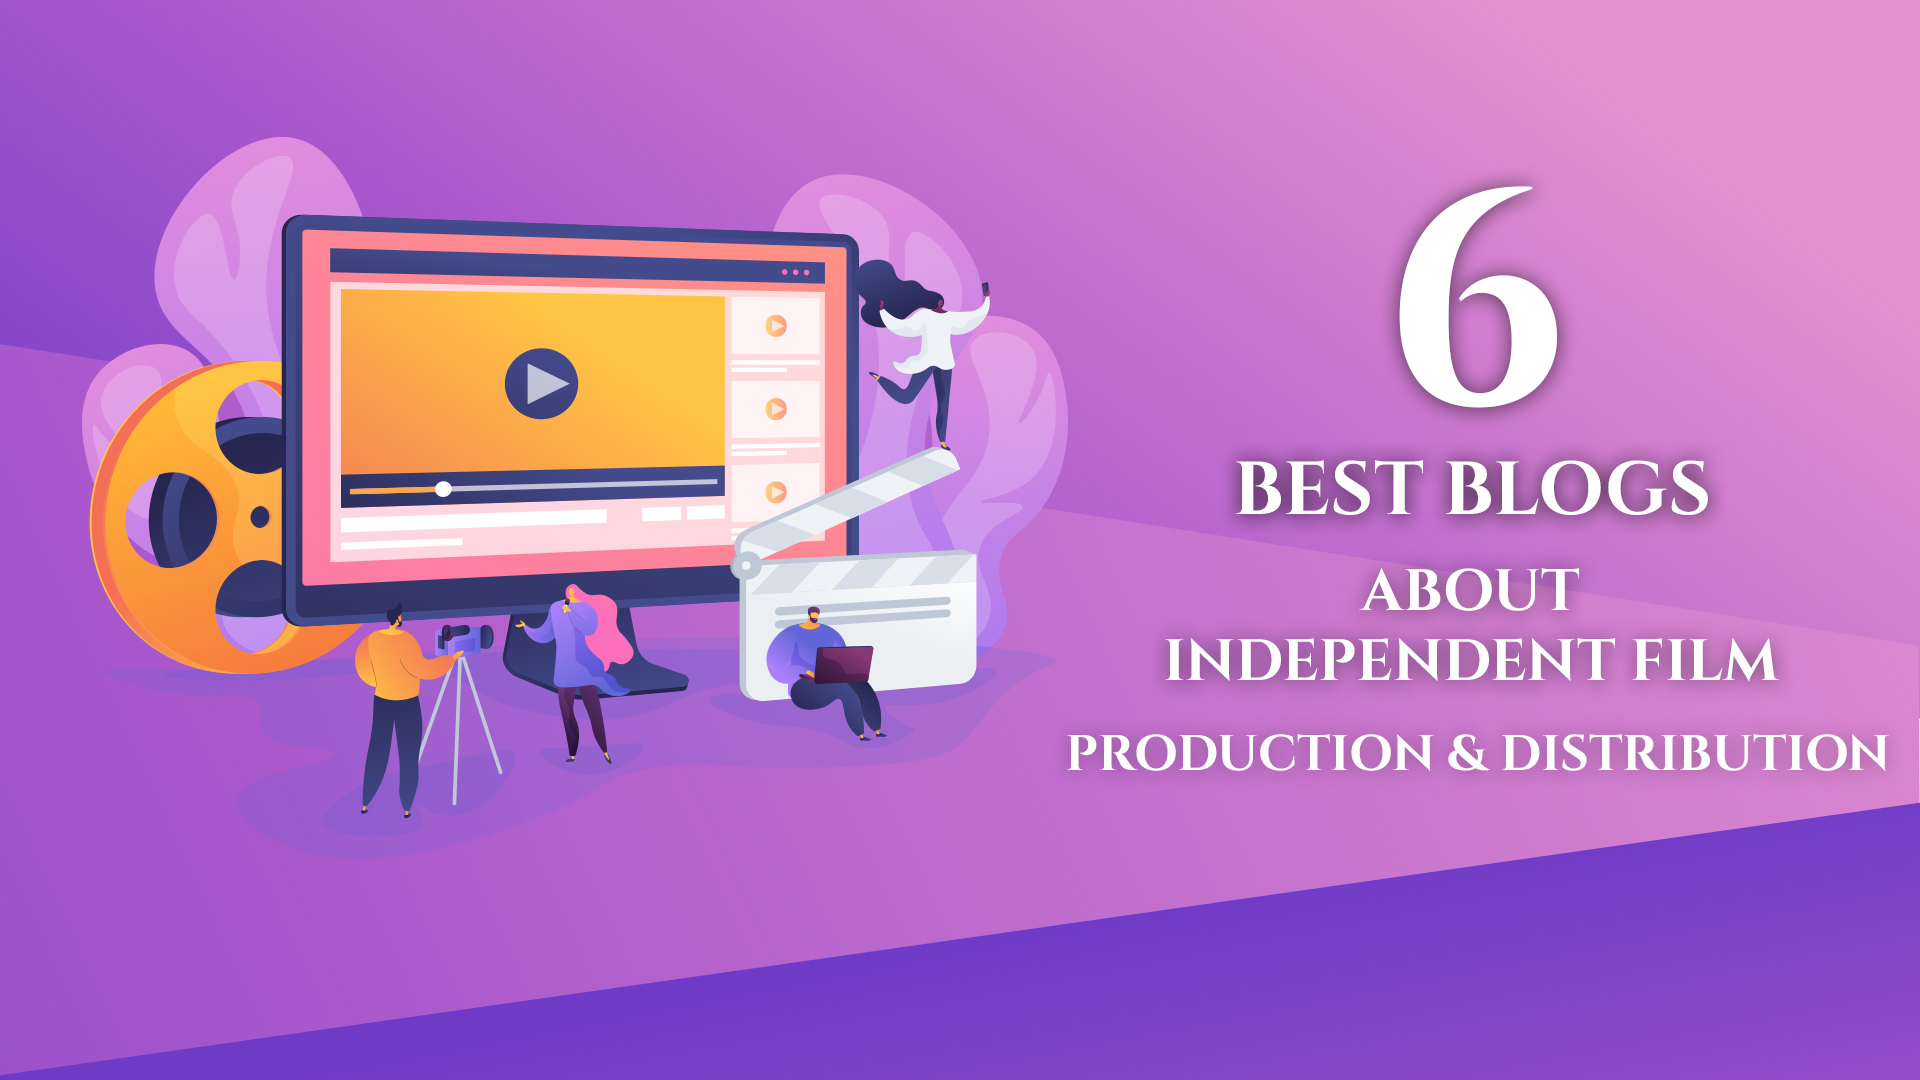 Six Best Blog-sites About Independent Film Production & Distribution